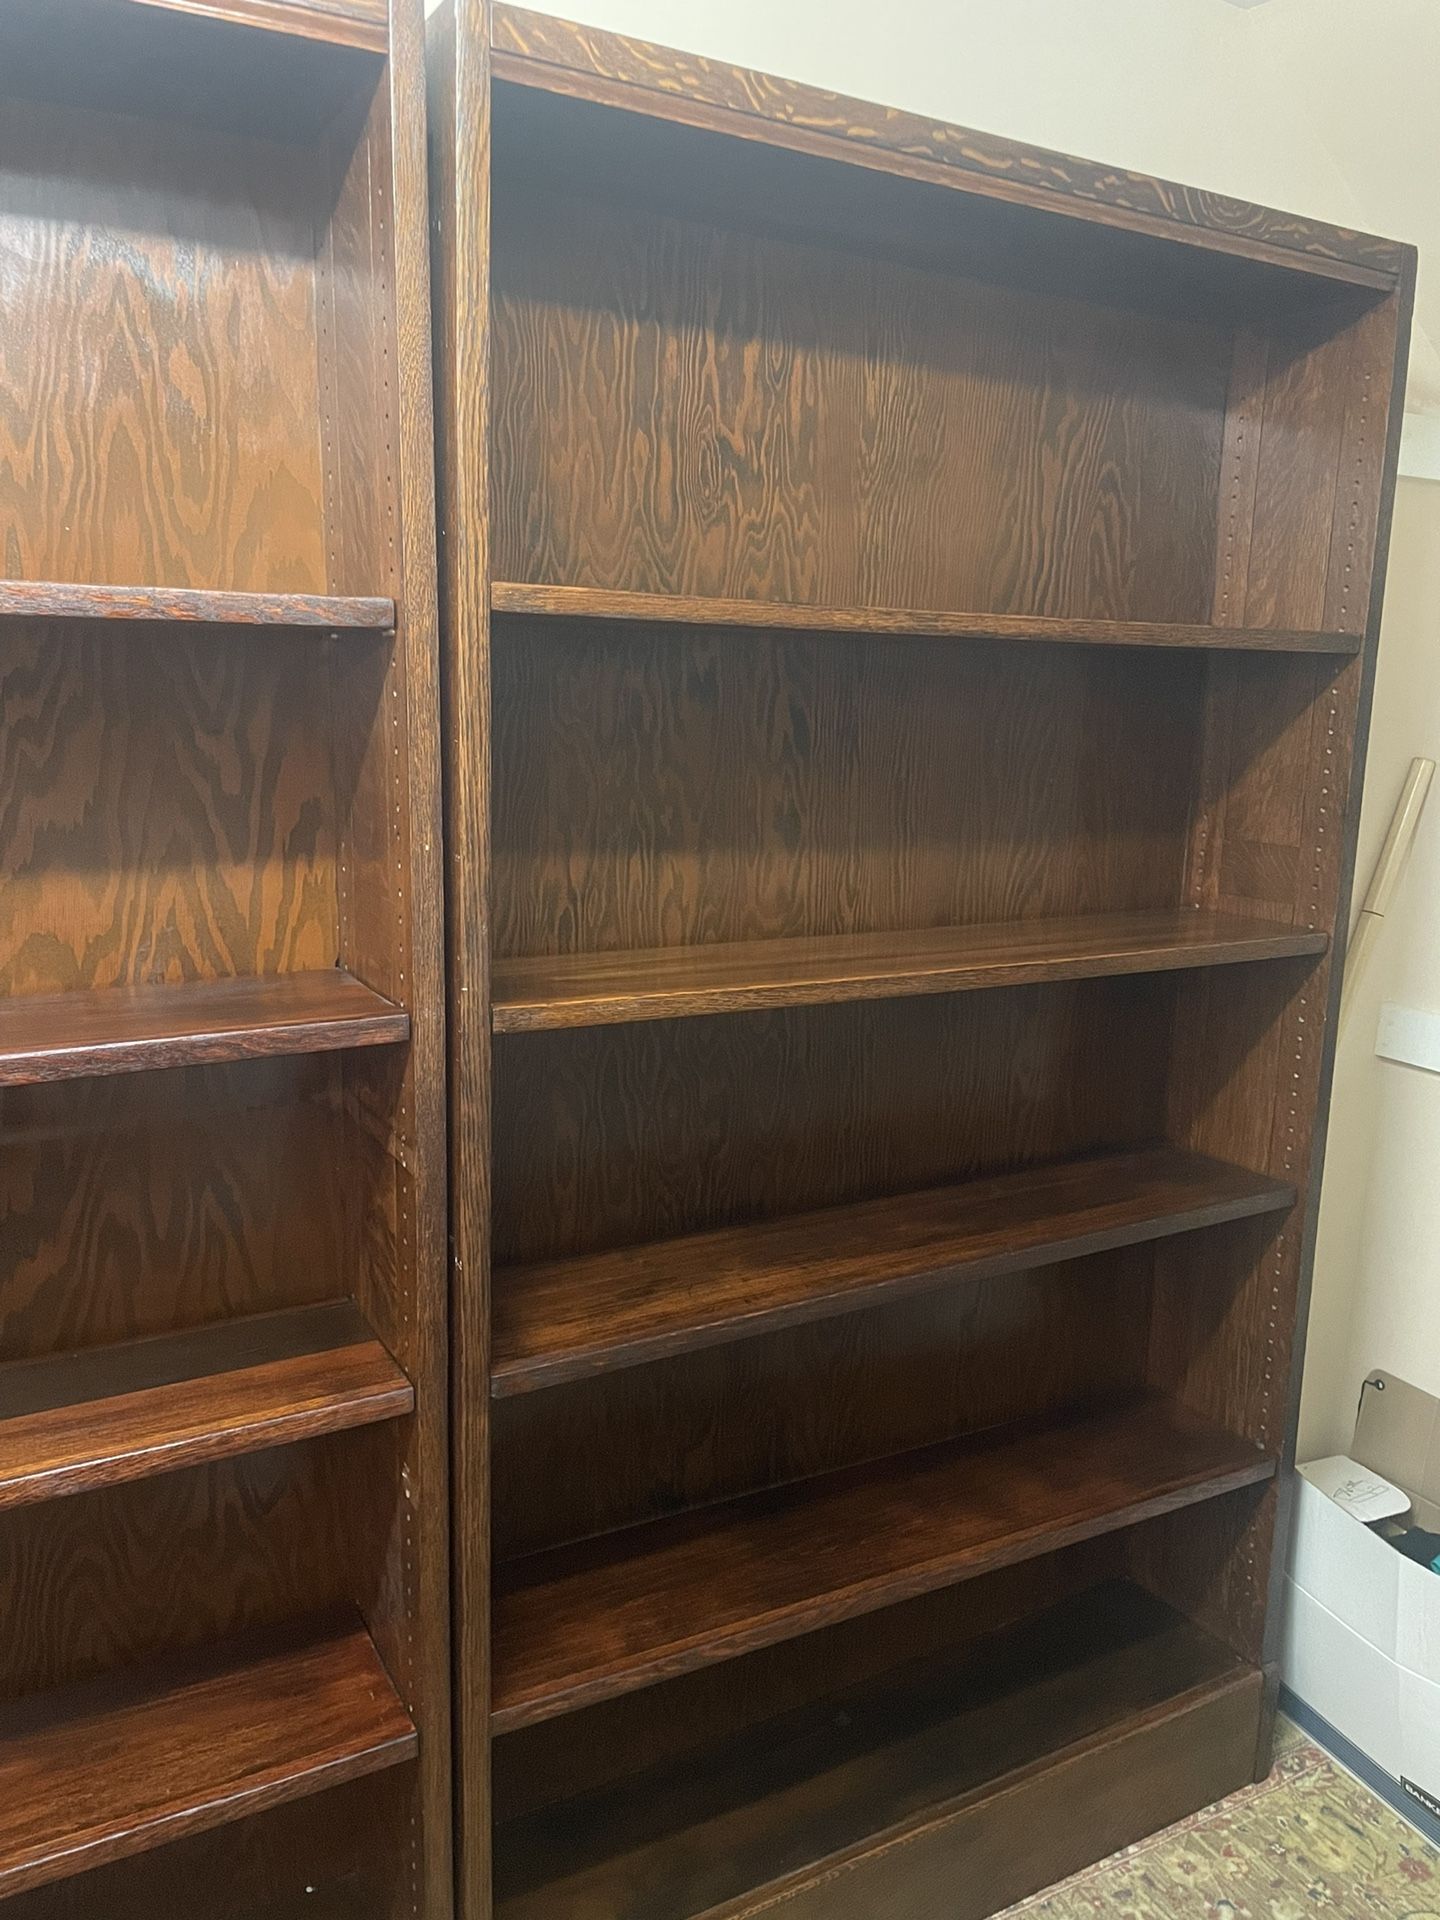  Solid Wood  Book Shelves  6.5 X4 Foot